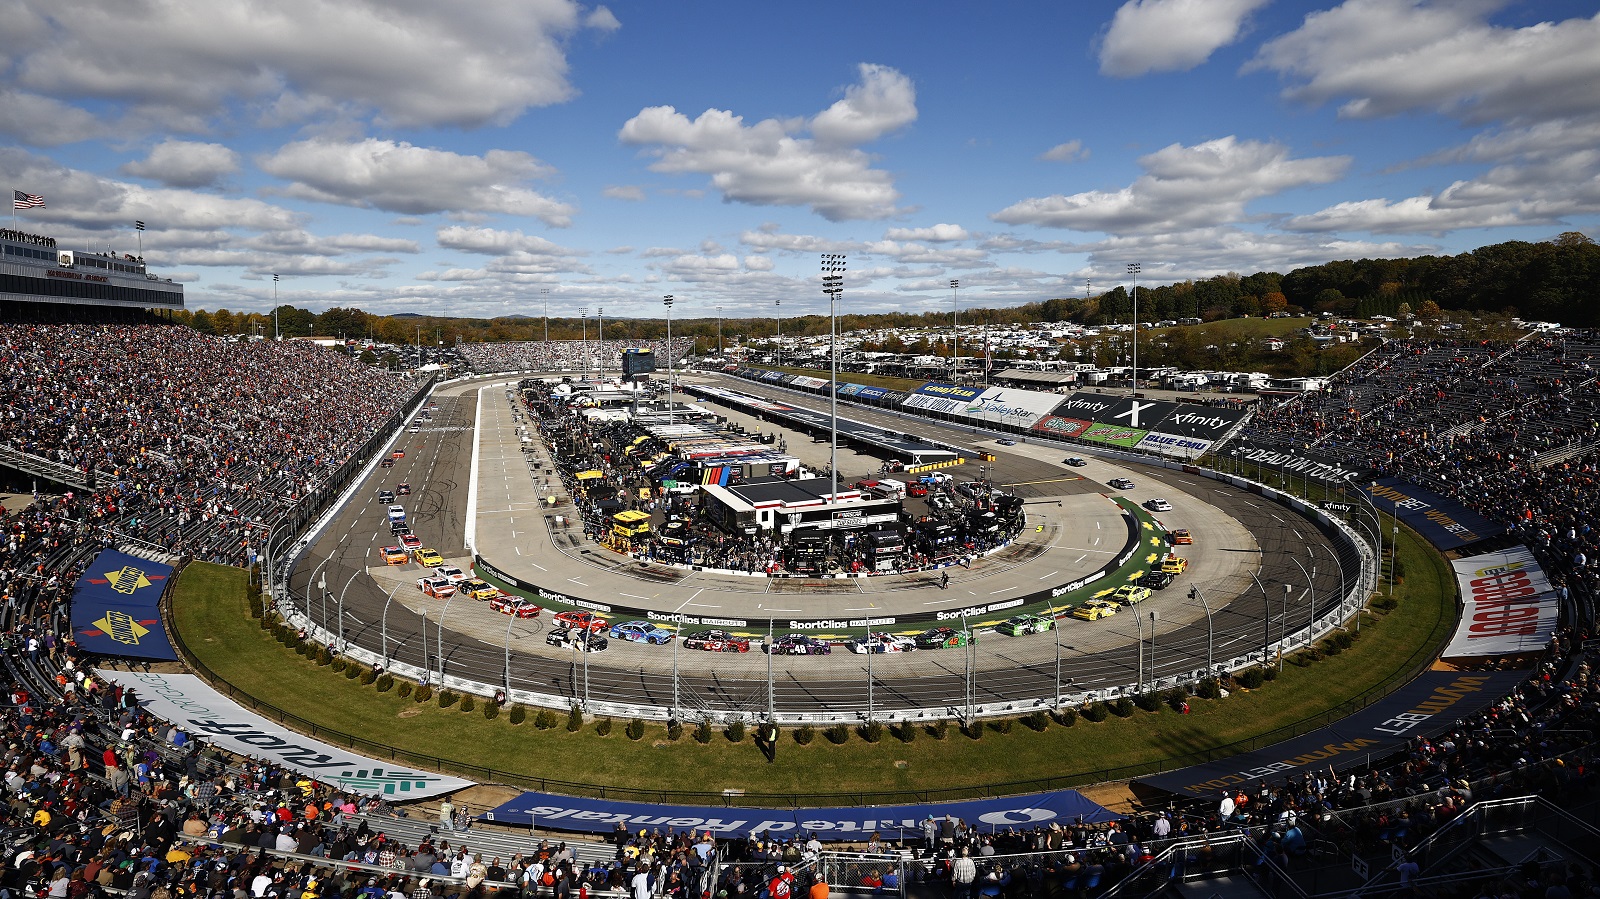 A general view of racing during the NASCAR Cup Series Xfinity 500 at Martinsville Speedway on Oct. 31, 2021, in Martinsville, Virginia. | Jared C. Tilton/Getty Images